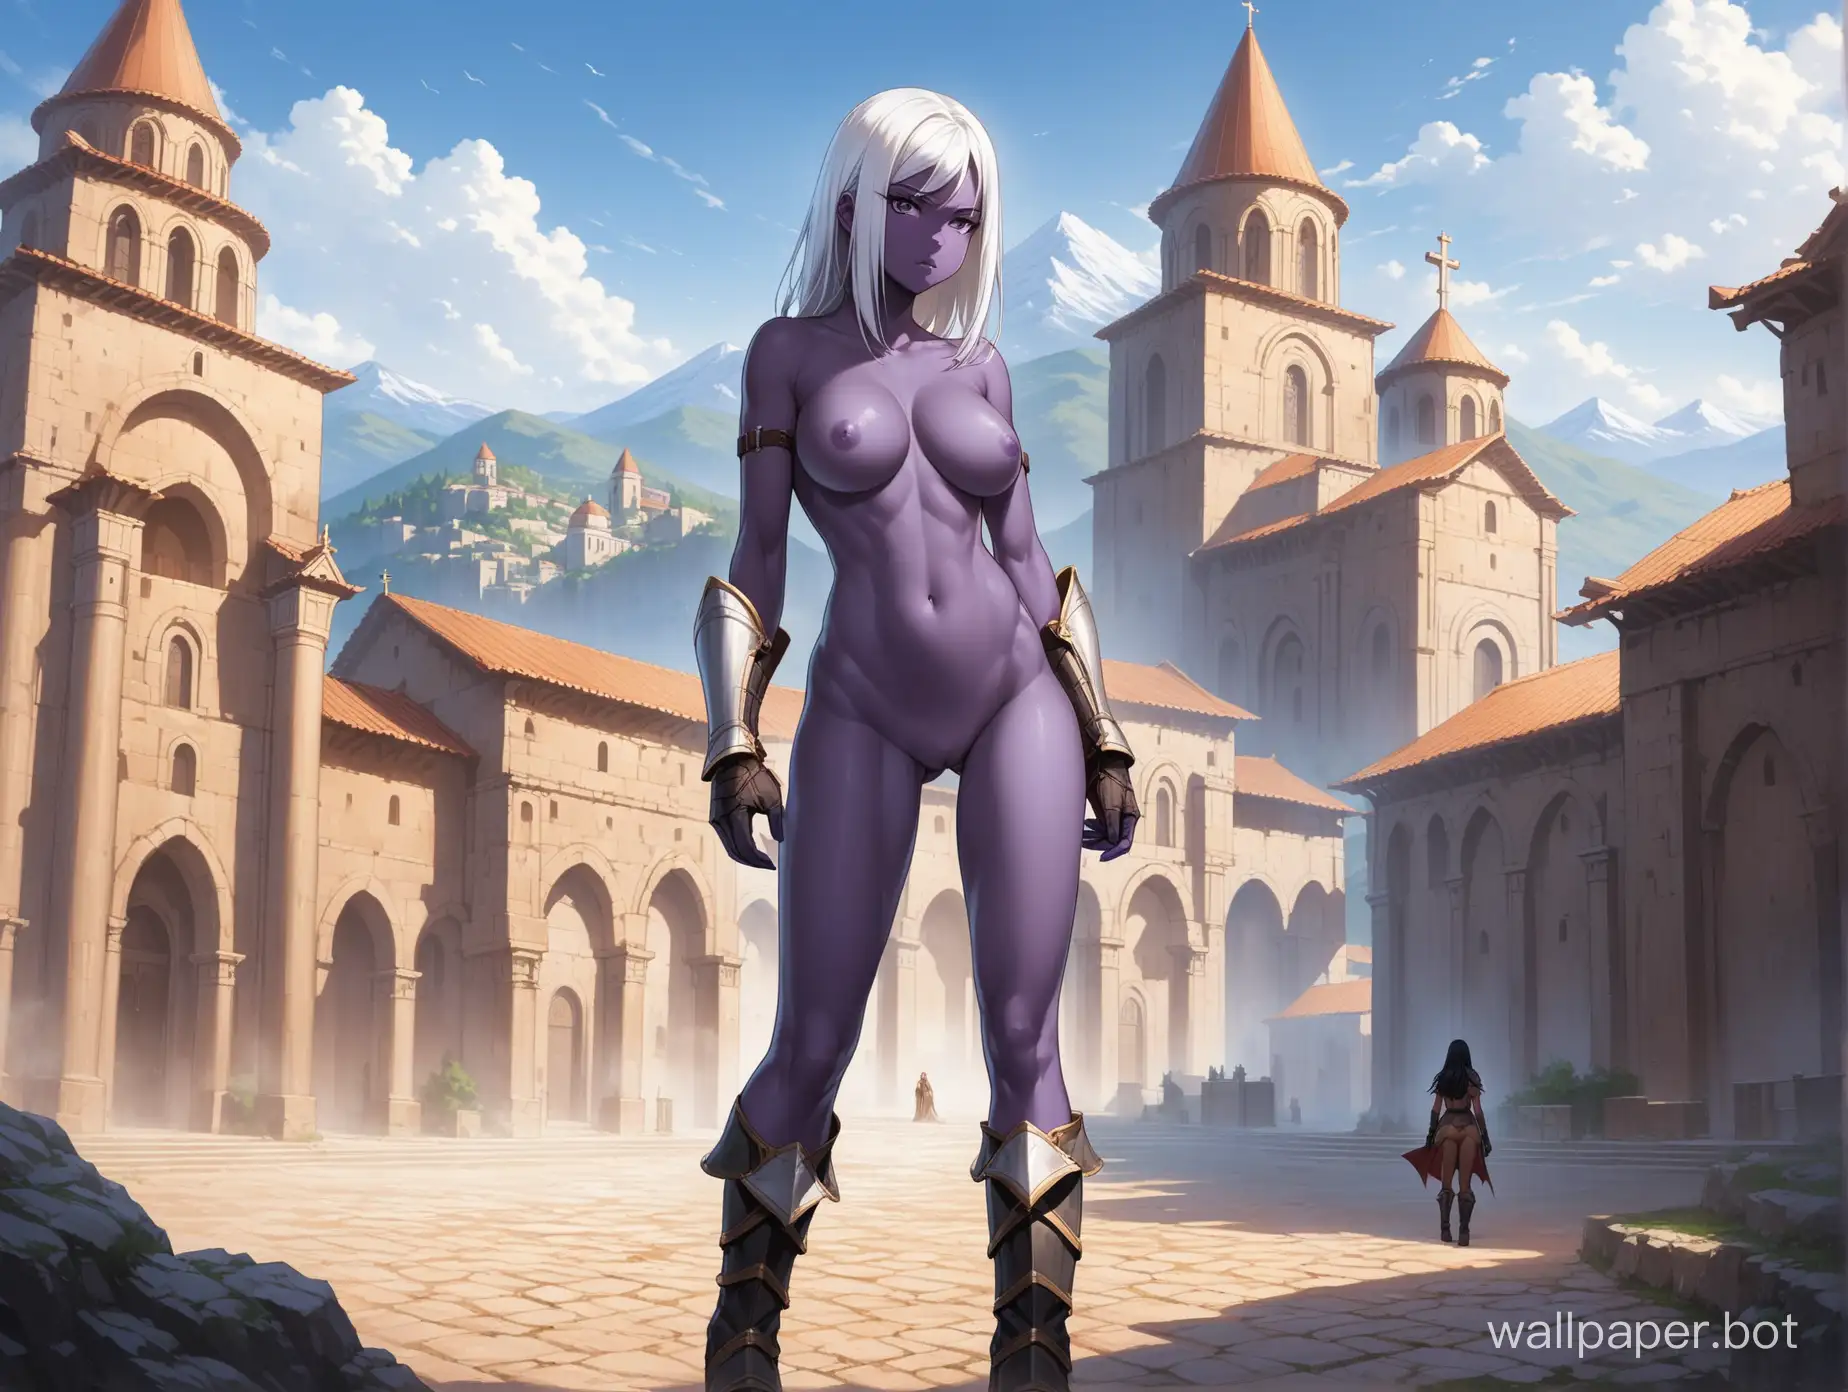 Serious-European-Woman-in-Purple-Armor-Standing-in-Ancient-City